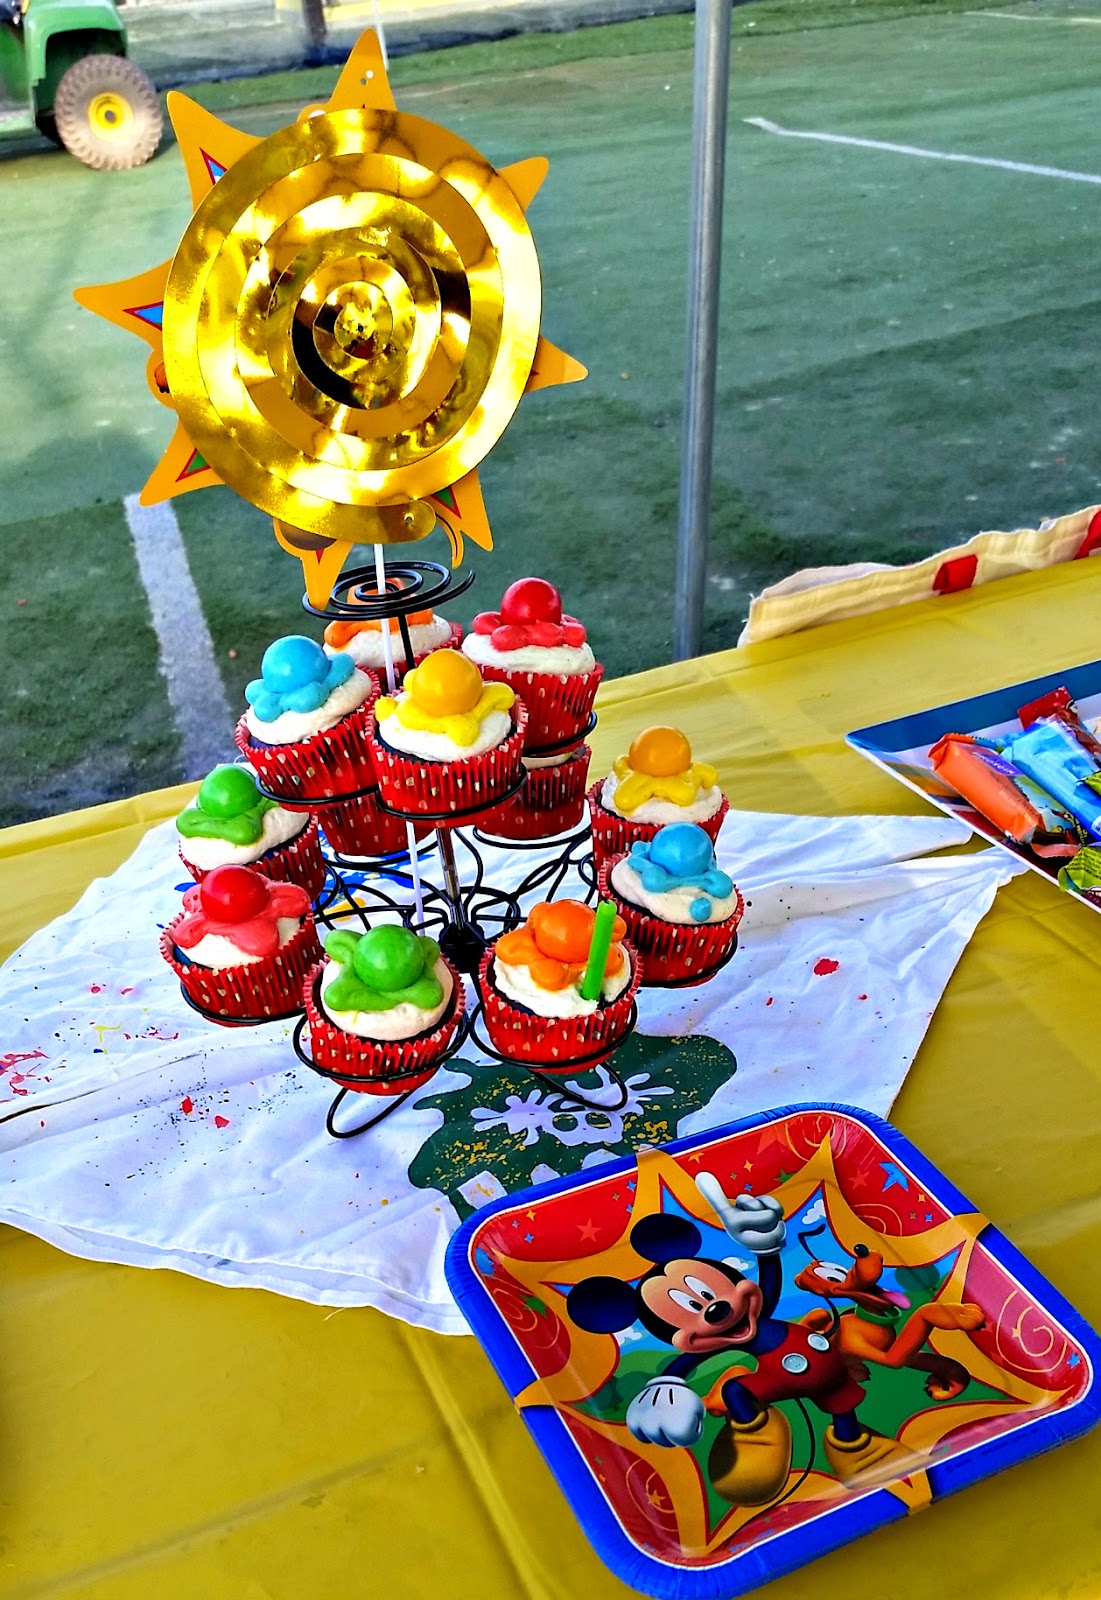 Show your DisneySide with a Mickey paintball birthday party 